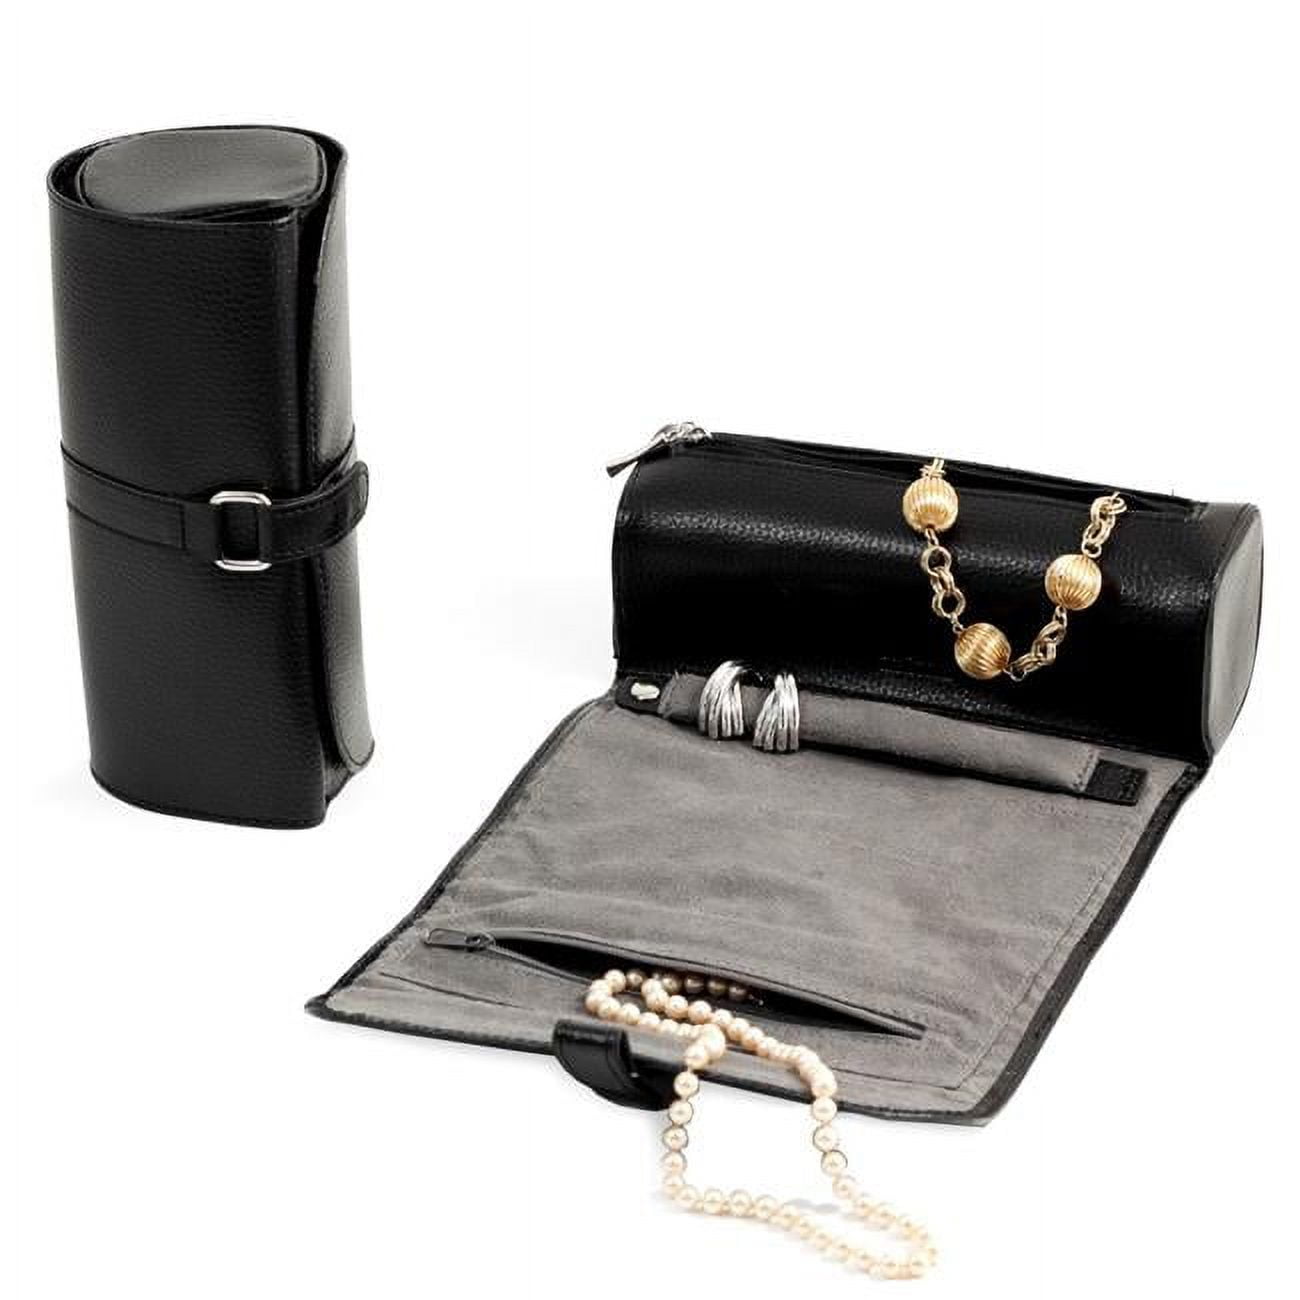 Bey-berk International Bb531blk Black Leather Jewelry Roll With Zippered Compartments